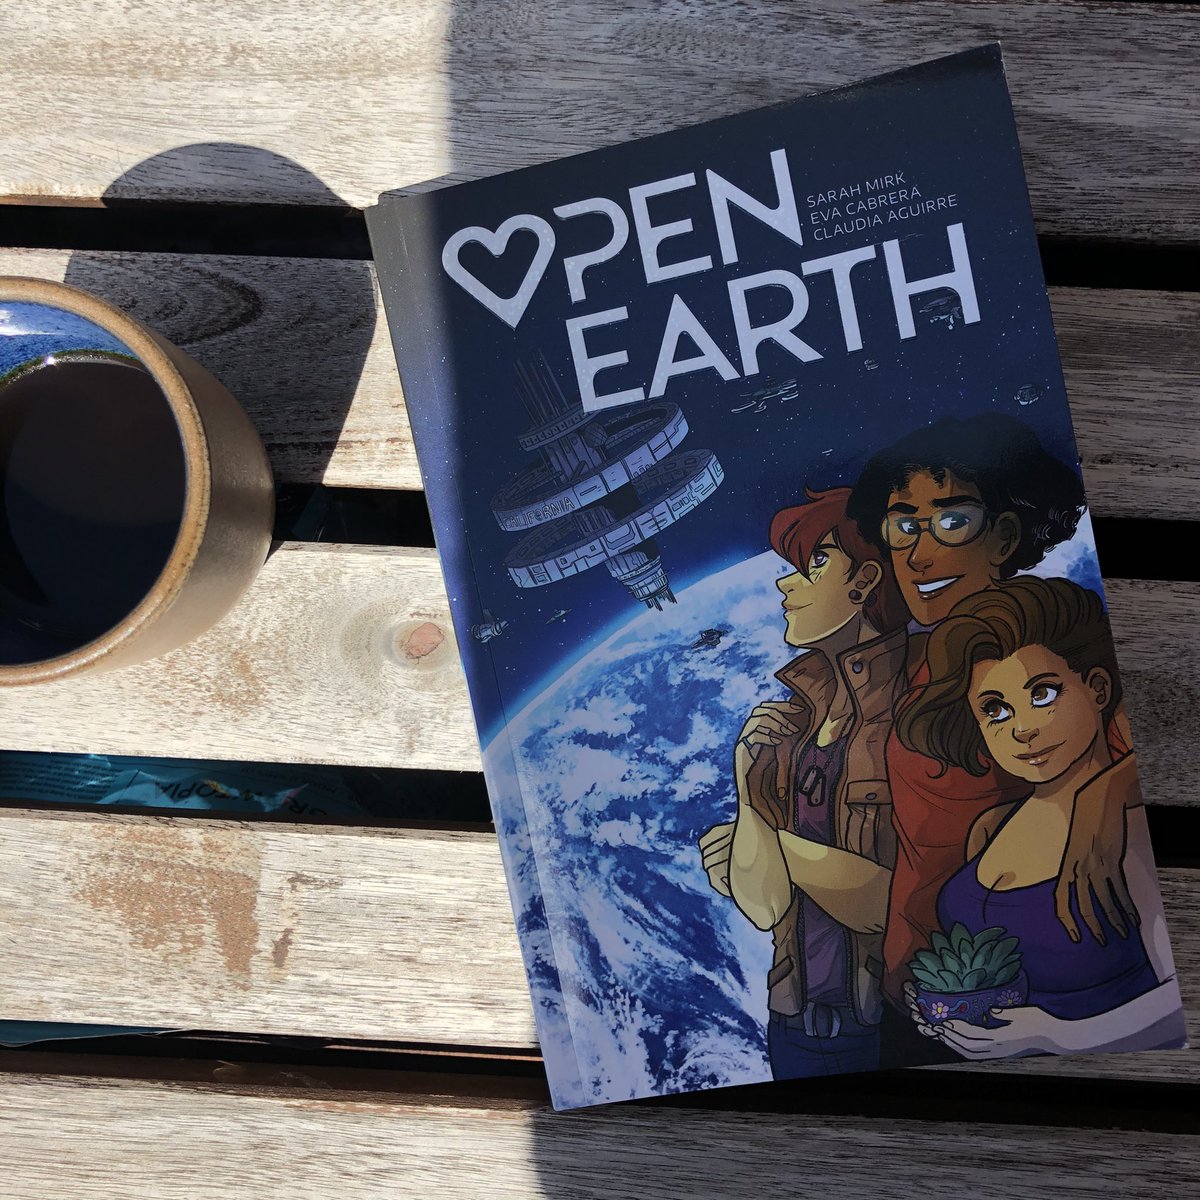 42/52Open Earth by Sarah Mirk, Eva Cabrera, & Claudia Aguirre. Queer sex in space! #52booksin52weeks  #2020books  #booksof2020  #pandemicreading  #graphicnovel